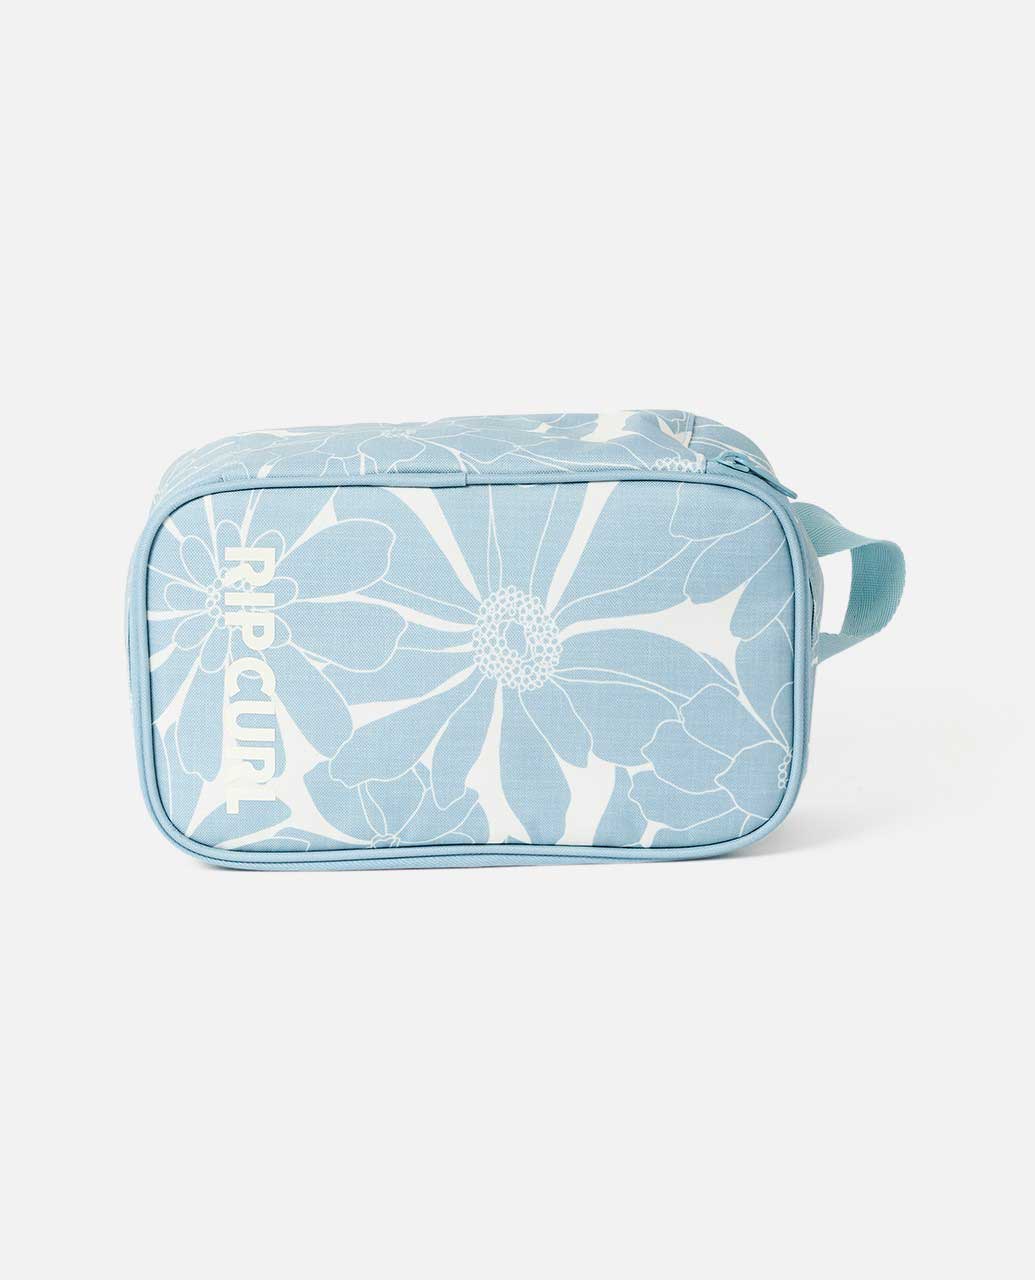 Ripcurl Lunch Box Mixed